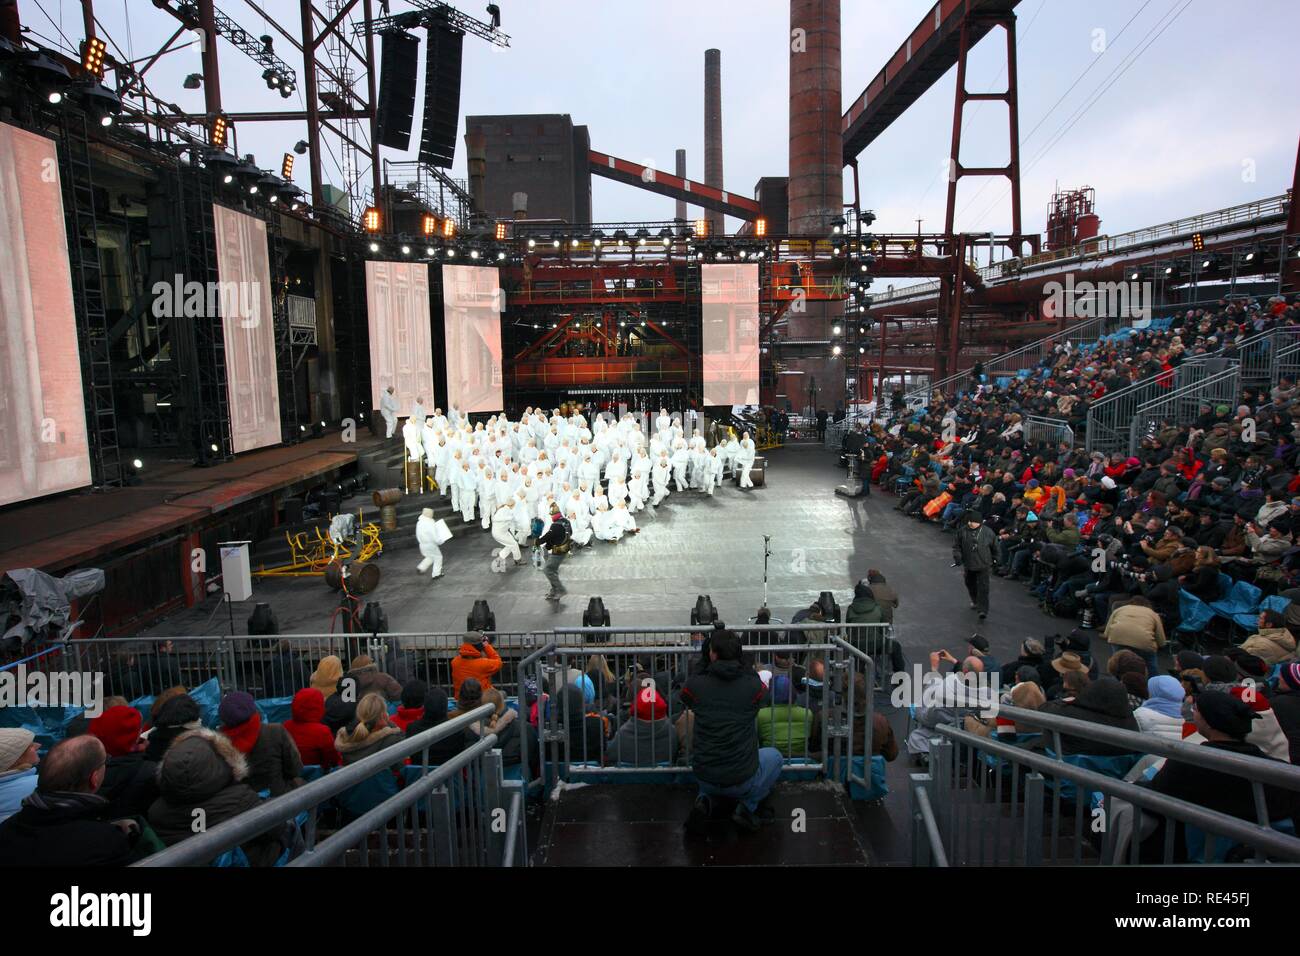 Dress rehearsal of the kick-off event for the Capital of Culture year 2010, Kokerei Zollverein coking plant, a part of the Zeche Stock Photo